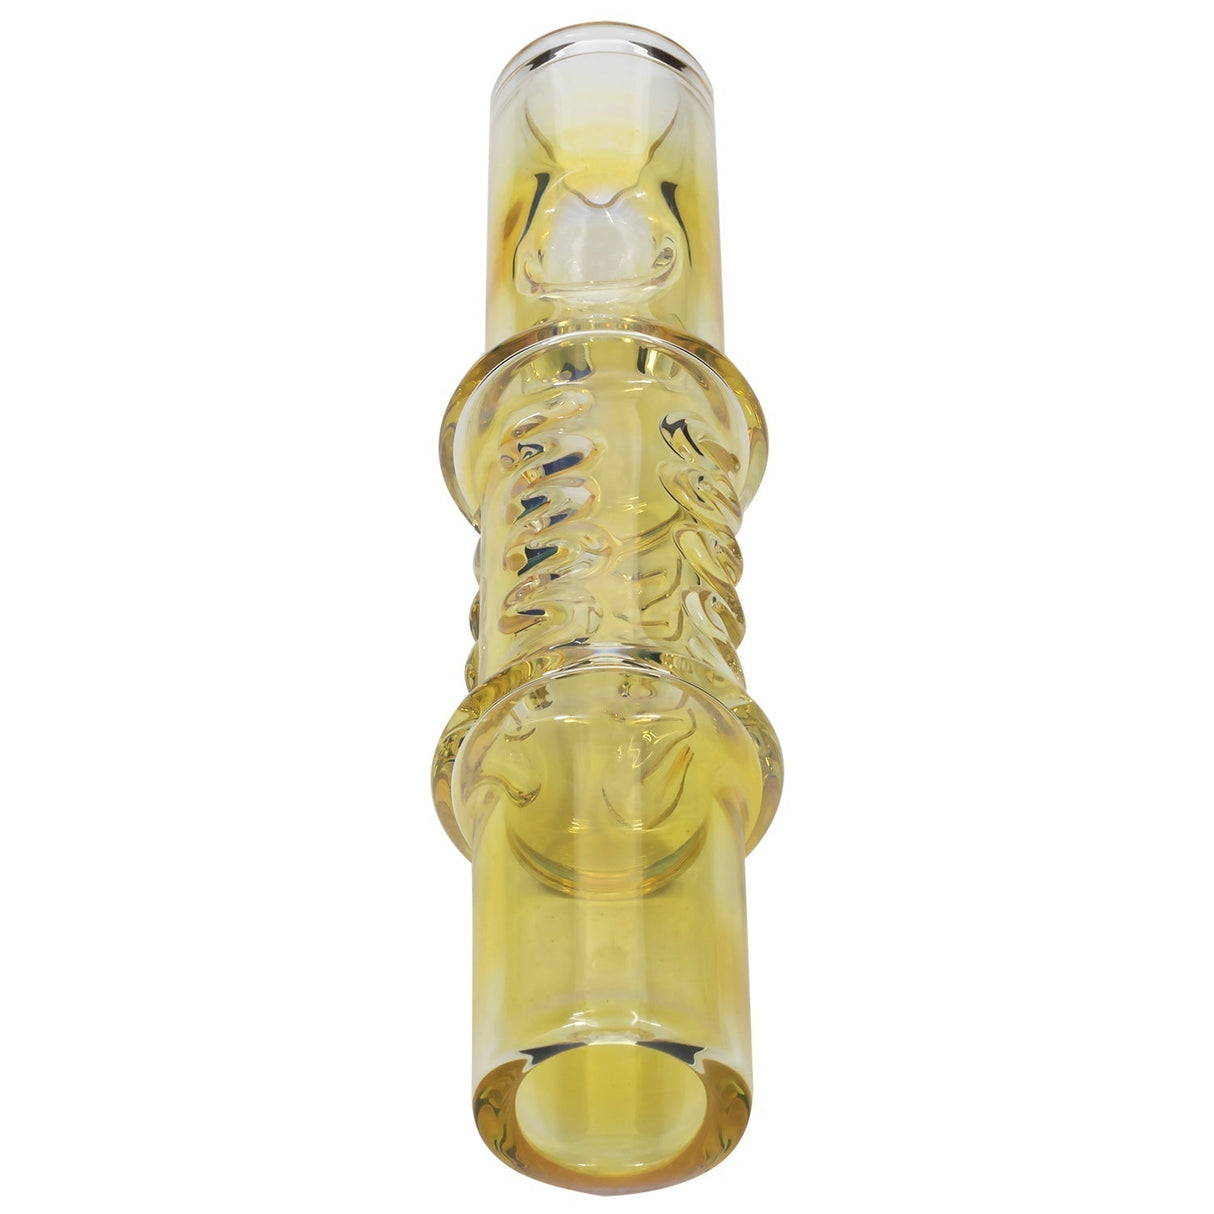 LA Pipes Silver Fumed Steamroller, 5" Compact Hand Pipe with Color Changing Design, Front View